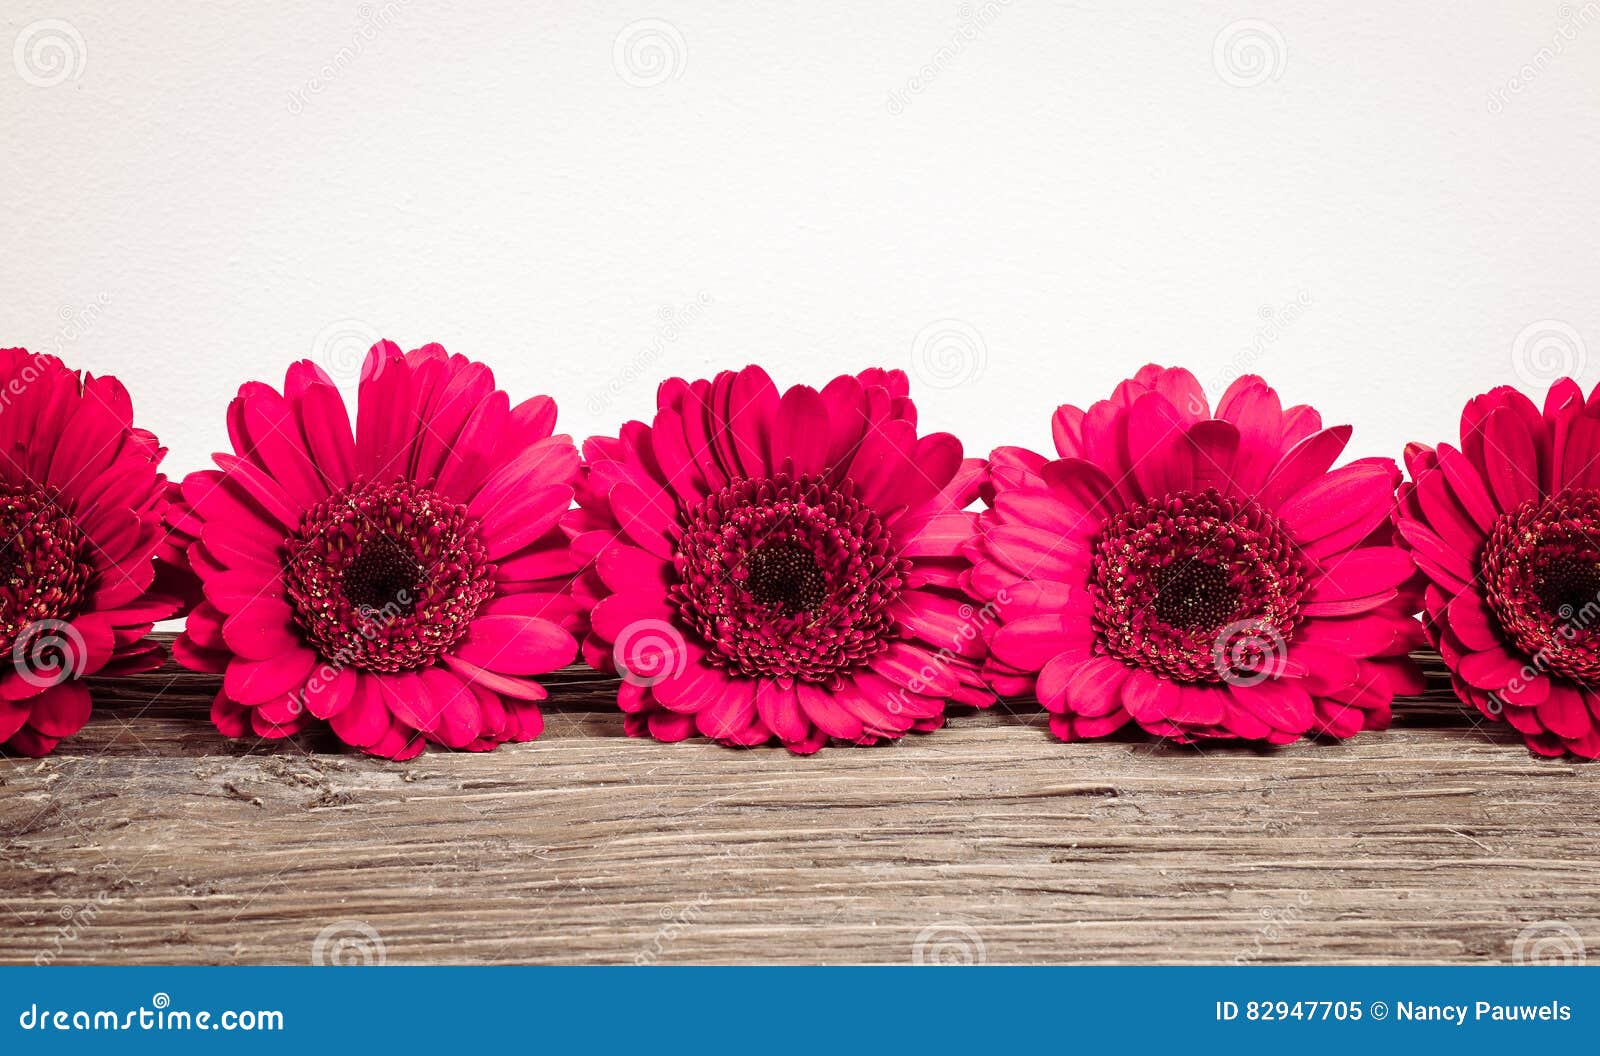 Border fuchsia Gerbera`s. Gerbera daisy flowers. Border with fresh fuchsia flower heads and space for text on white and wood background.